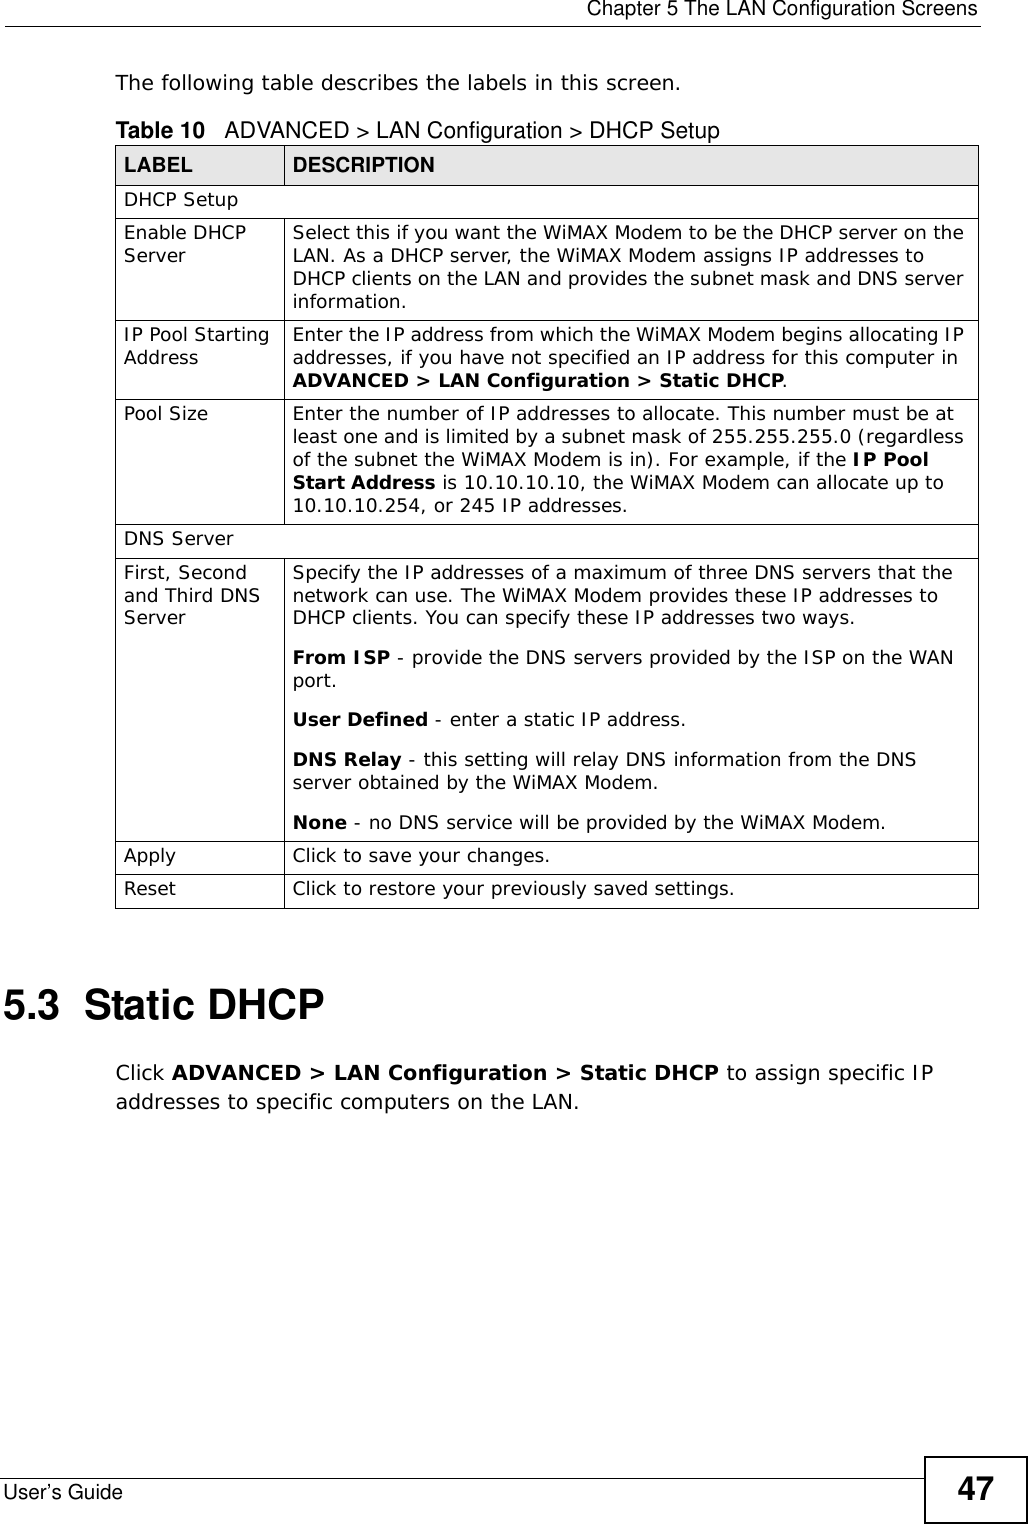  Chapter 5 The LAN Configuration ScreensUser’s Guide 47The following table describes the labels in this screen.      5.3  Static DHCPClick ADVANCED &gt; LAN Configuration &gt; Static DHCP to assign specific IP addresses to specific computers on the LAN.Table 10   ADVANCED &gt; LAN Configuration &gt; DHCP SetupLABEL DESCRIPTIONDHCP SetupEnable DHCP Server Select this if you want the WiMAX Modem to be the DHCP server on the LAN. As a DHCP server, the WiMAX Modem assigns IP addresses to DHCP clients on the LAN and provides the subnet mask and DNS server information.IP Pool Starting Address Enter the IP address from which the WiMAX Modem begins allocating IP addresses, if you have not specified an IP address for this computer in ADVANCED &gt; LAN Configuration &gt; Static DHCP.Pool Size Enter the number of IP addresses to allocate. This number must be at least one and is limited by a subnet mask of 255.255.255.0 (regardless of the subnet the WiMAX Modem is in). For example, if the IP Pool Start Address is 10.10.10.10, the WiMAX Modem can allocate up to 10.10.10.254, or 245 IP addresses.DNS ServerFirst, Second and Third DNS ServerSpecify the IP addresses of a maximum of three DNS servers that the network can use. The WiMAX Modem provides these IP addresses to DHCP clients. You can specify these IP addresses two ways.From ISP - provide the DNS servers provided by the ISP on the WAN port.User Defined - enter a static IP address.DNS Relay - this setting will relay DNS information from the DNS server obtained by the WiMAX Modem.None - no DNS service will be provided by the WiMAX Modem.Apply Click to save your changes.Reset Click to restore your previously saved settings.